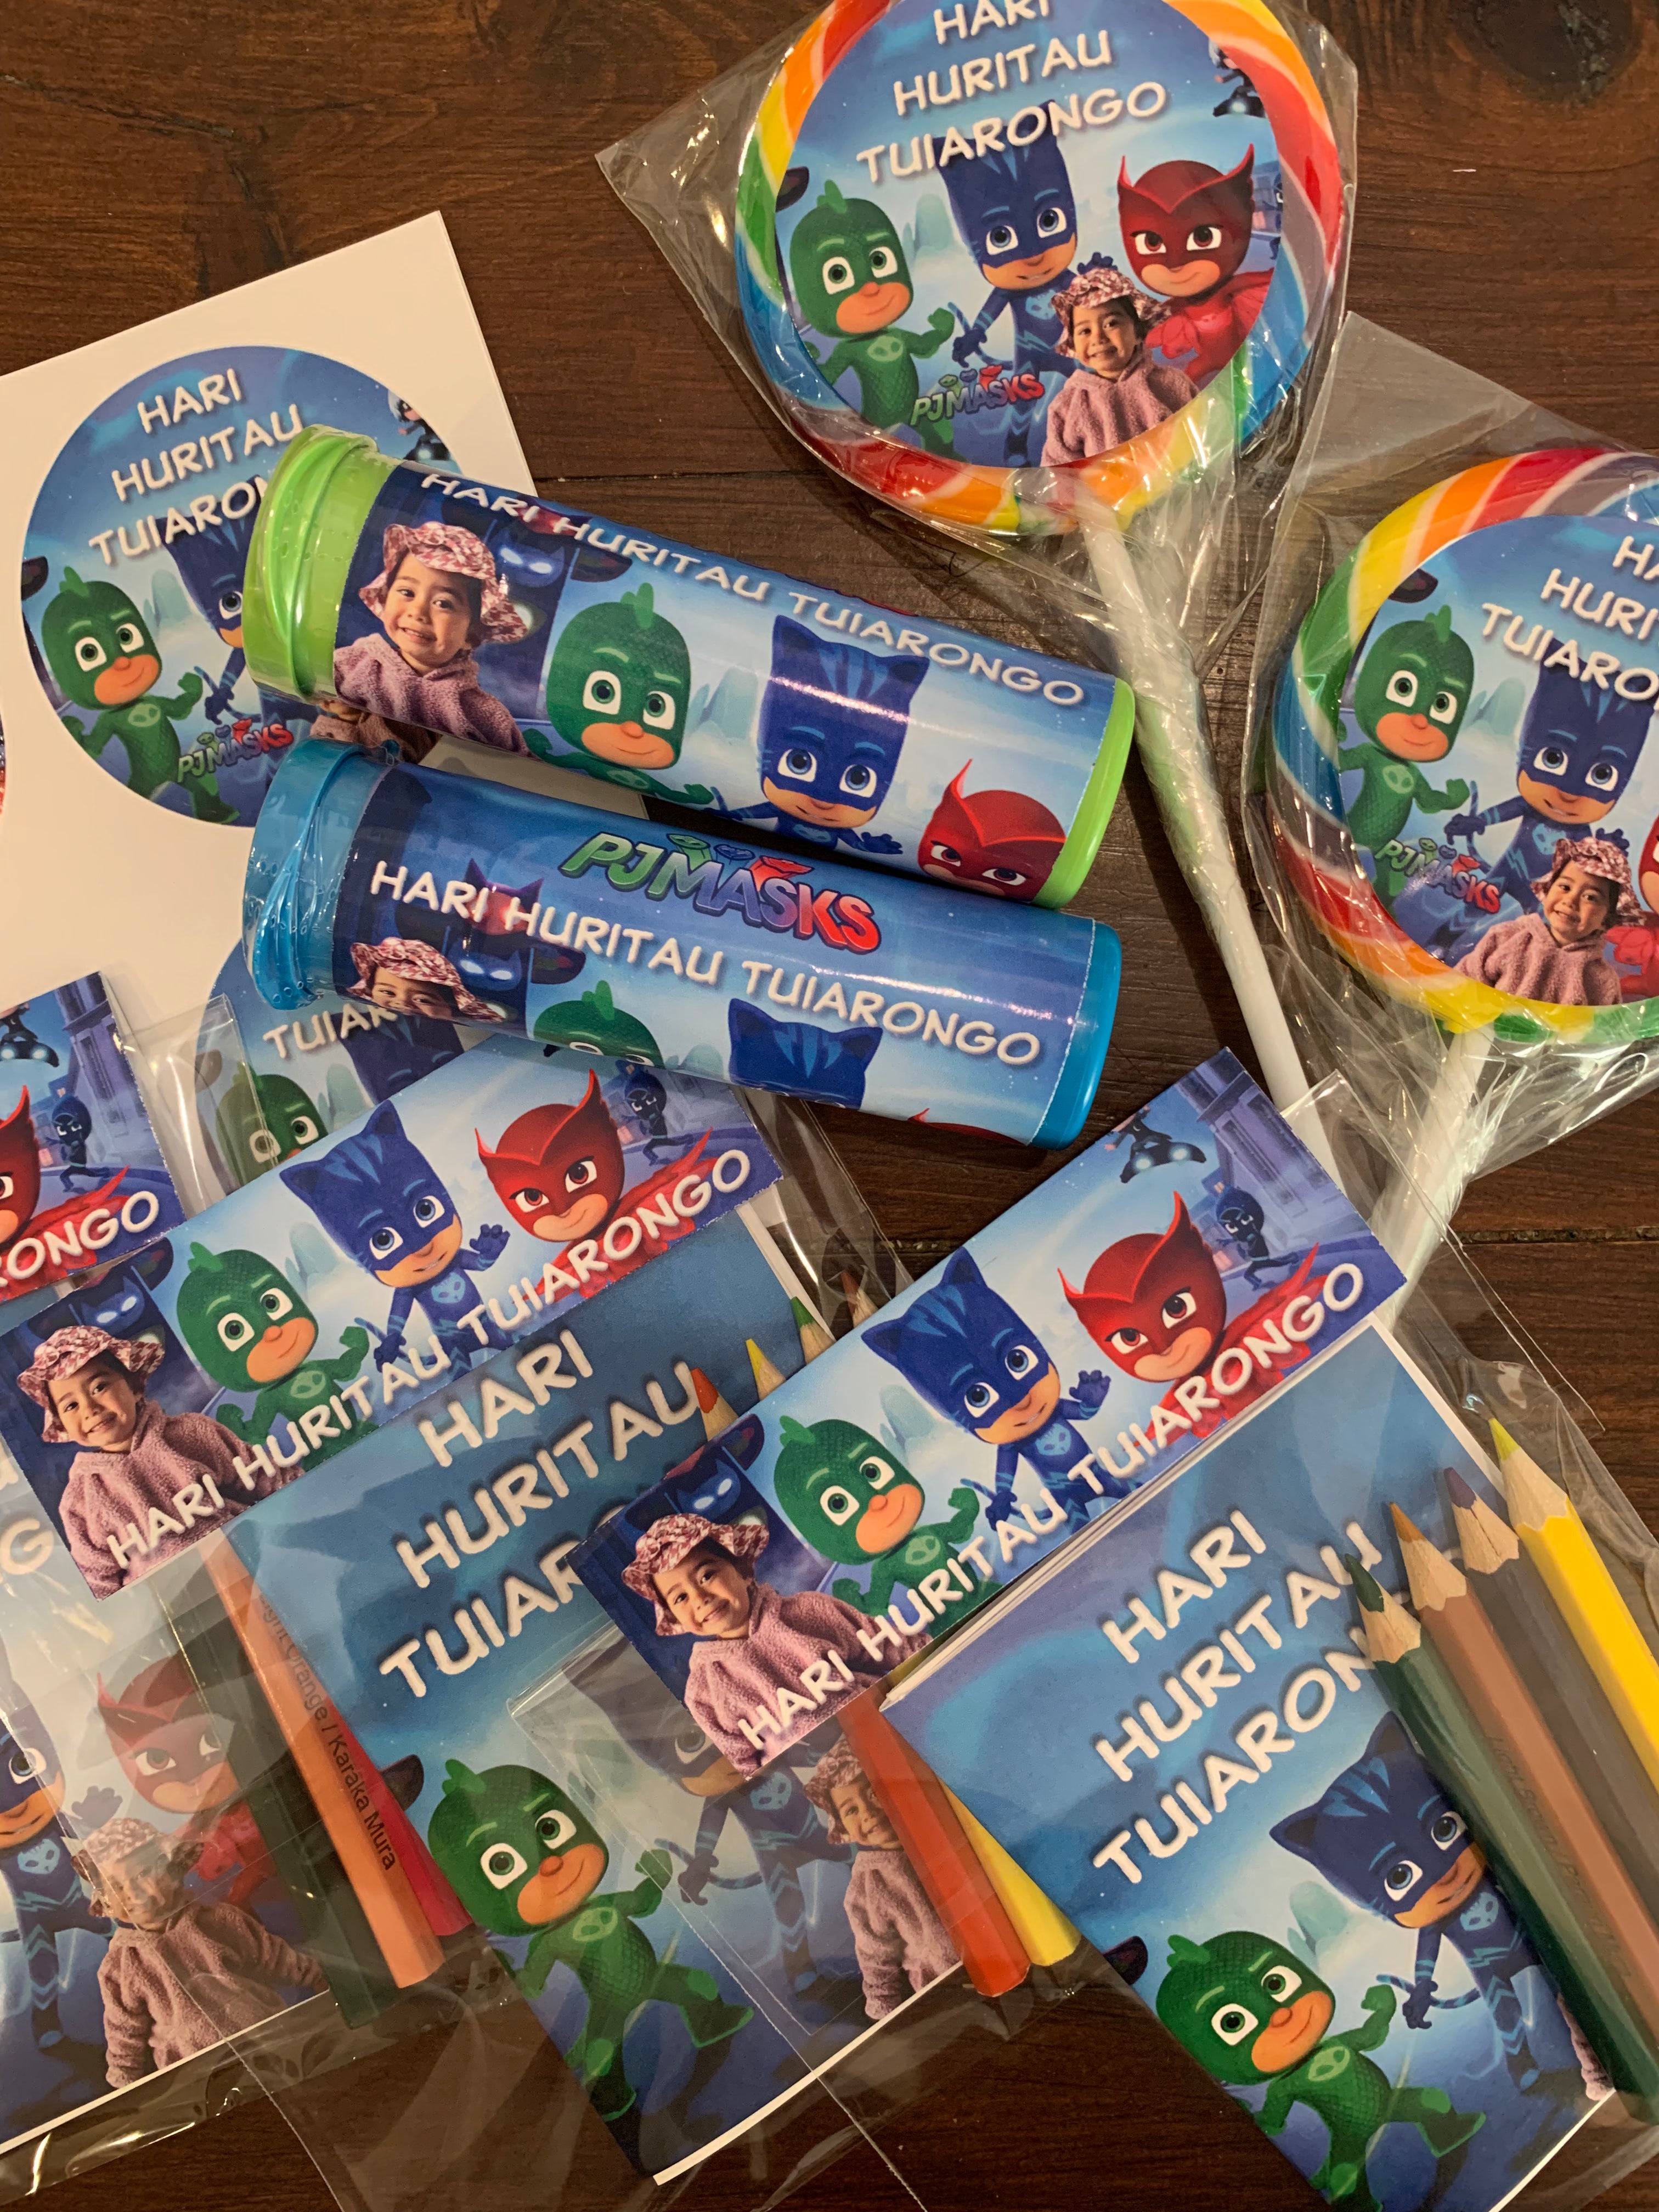 PJ Masks personalised party favours nz